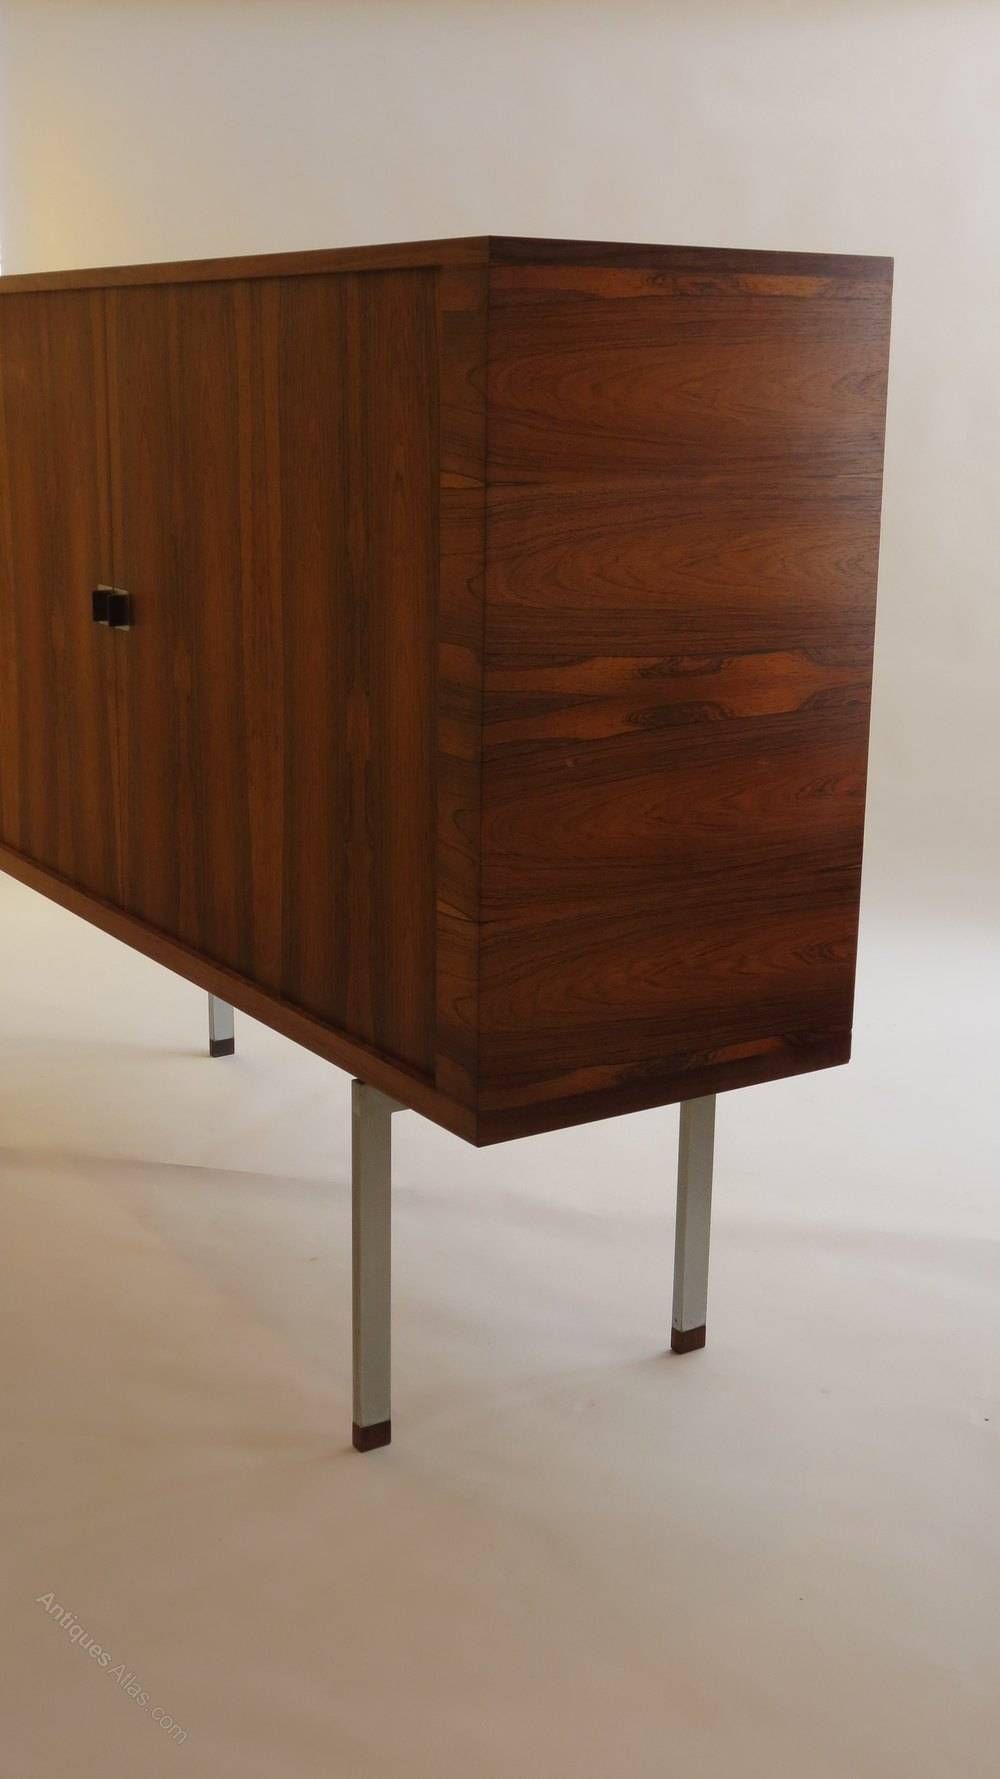 Antiques Atlas – Hans Wegner Rosewood Sideboard 1960s Danish Intended For Most Up To Date Hans Wegner Sideboards (View 8 of 15)